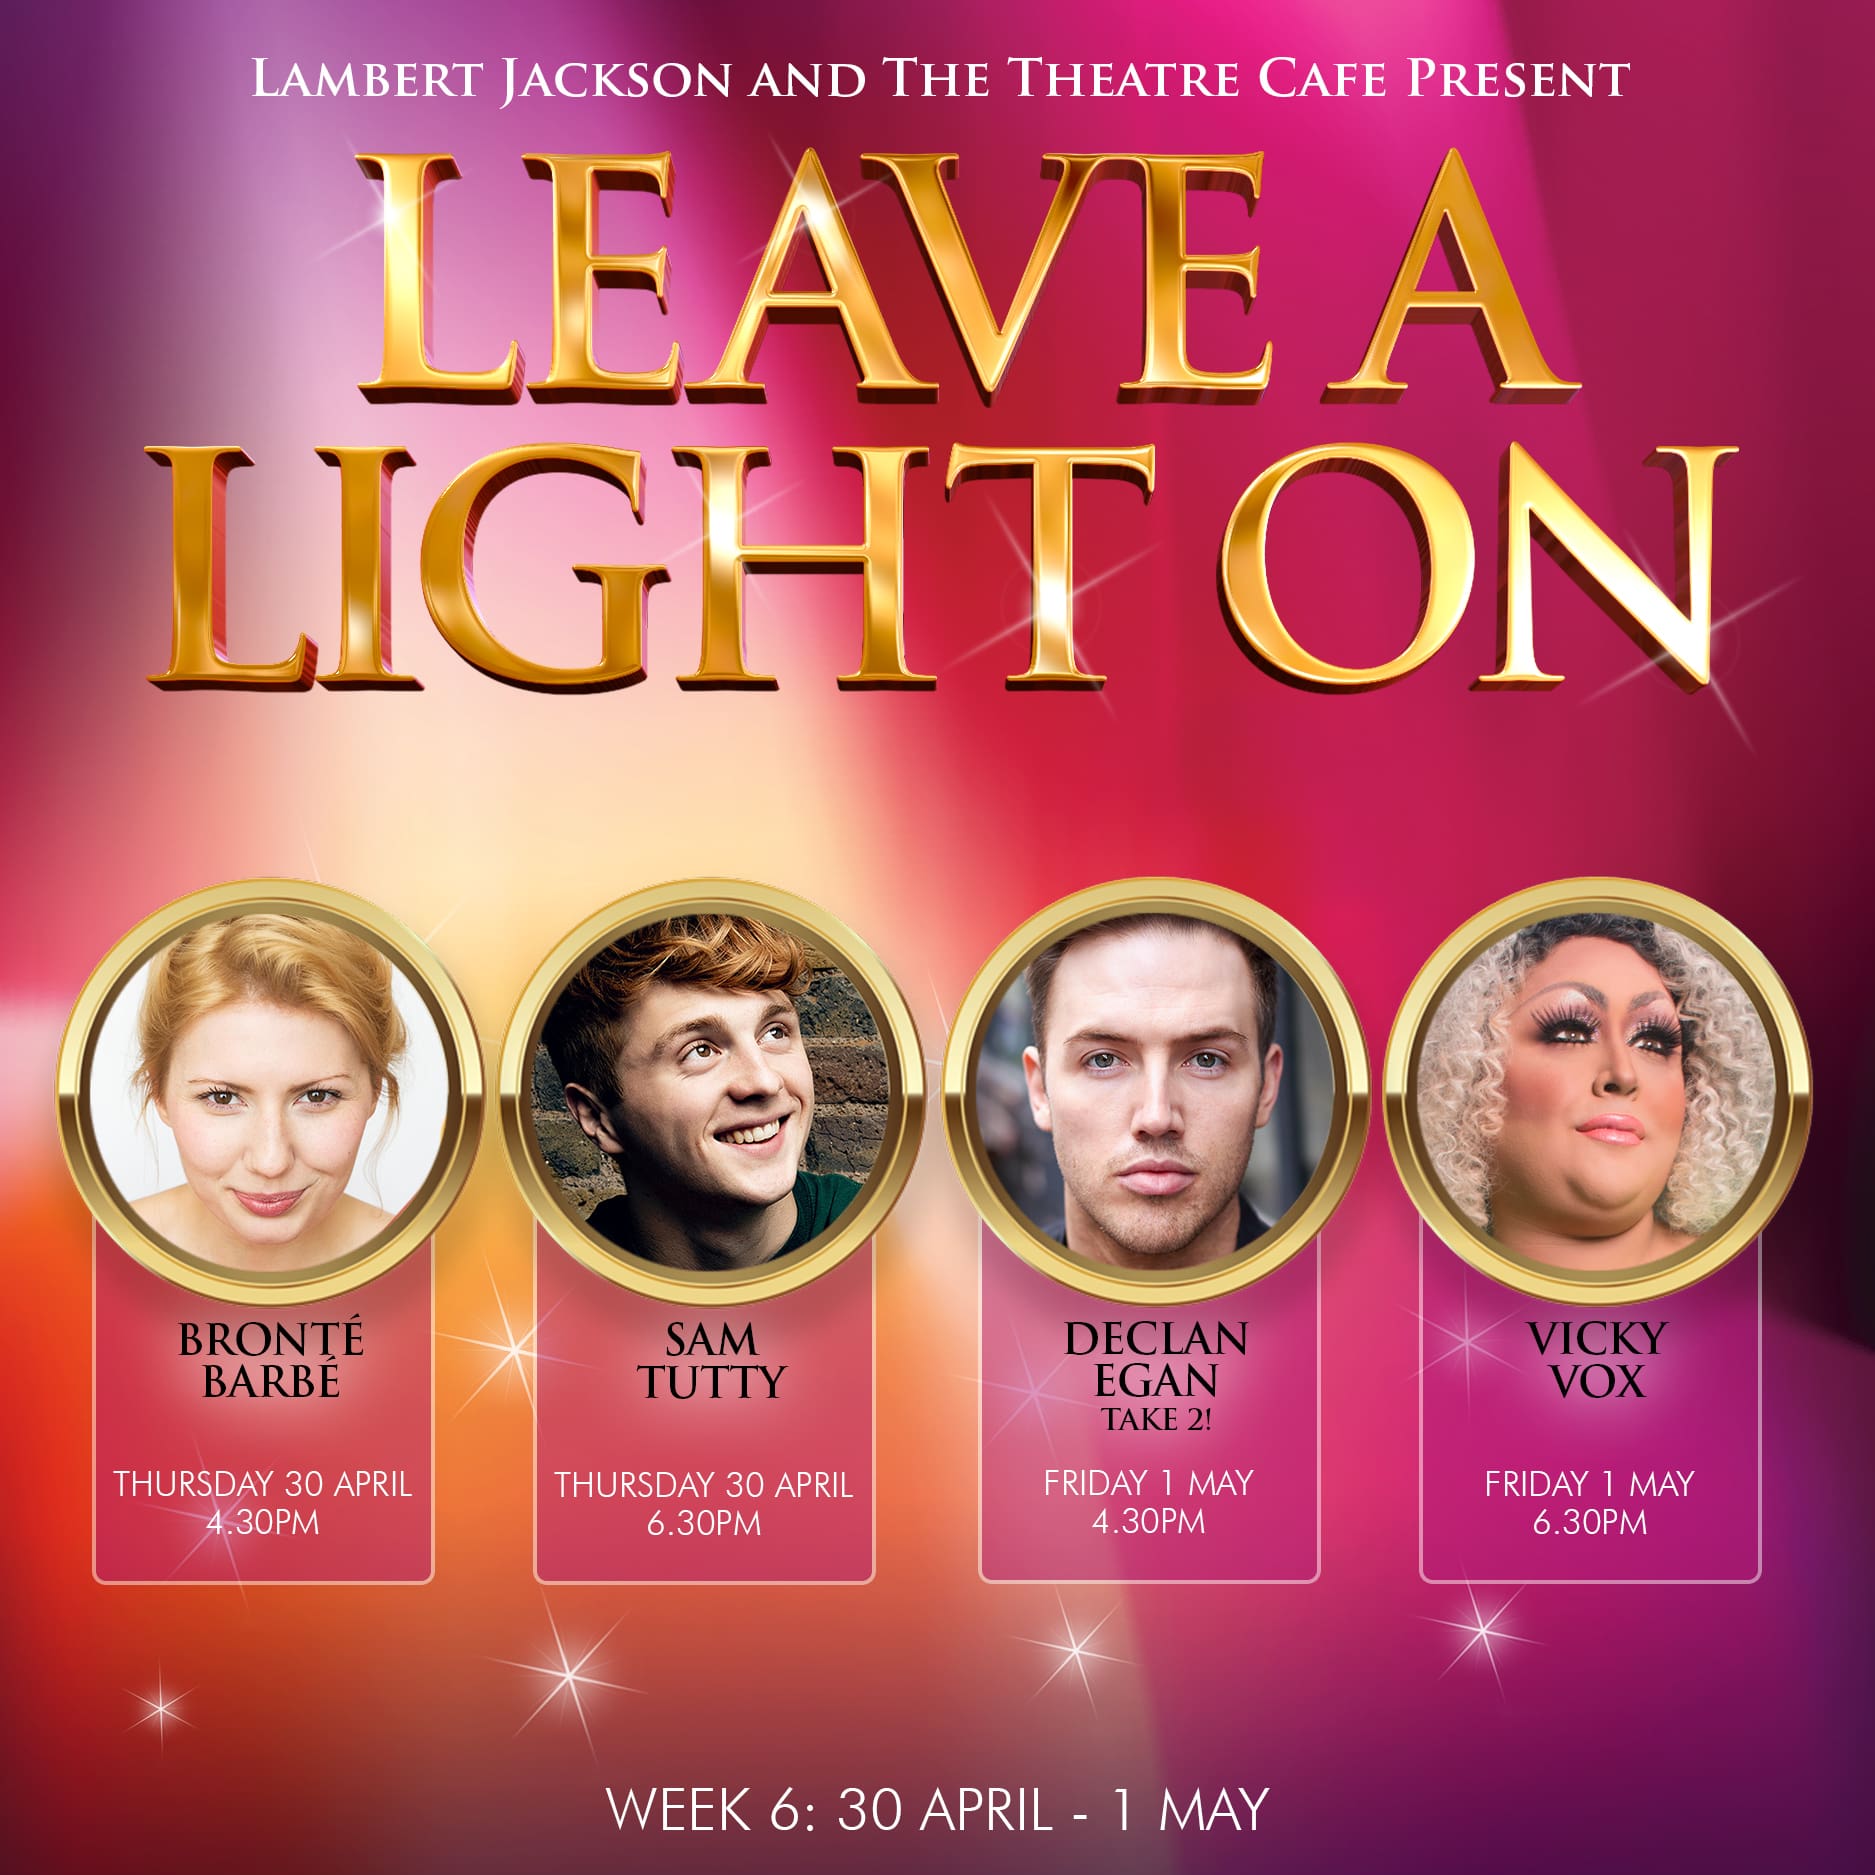 NEWS: Lineup announced for week 6 of Leave A Light On